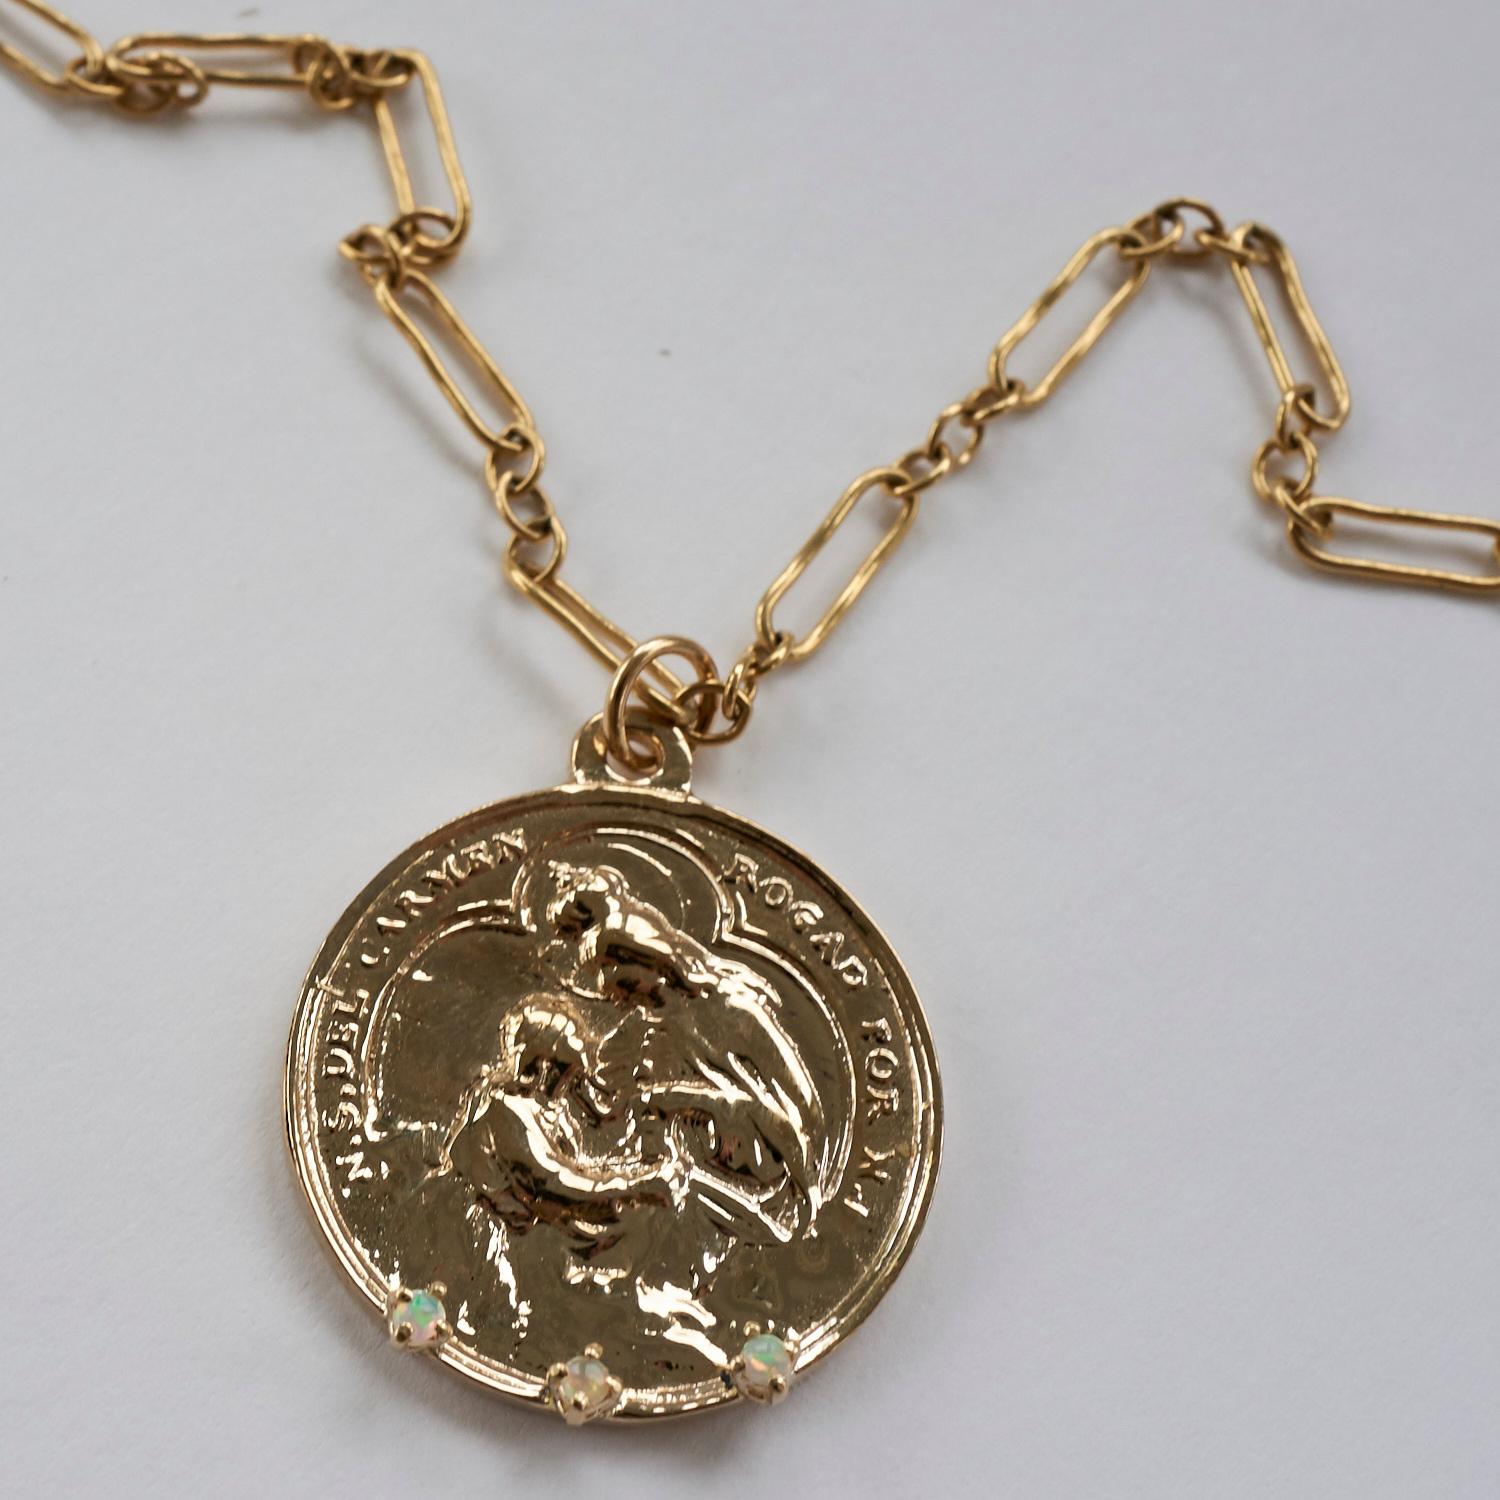 Brilliant Cut Medal Virgin Mary Opal Coin Pendant Chain Necklace Gold Filled  J Dauphin For Sale